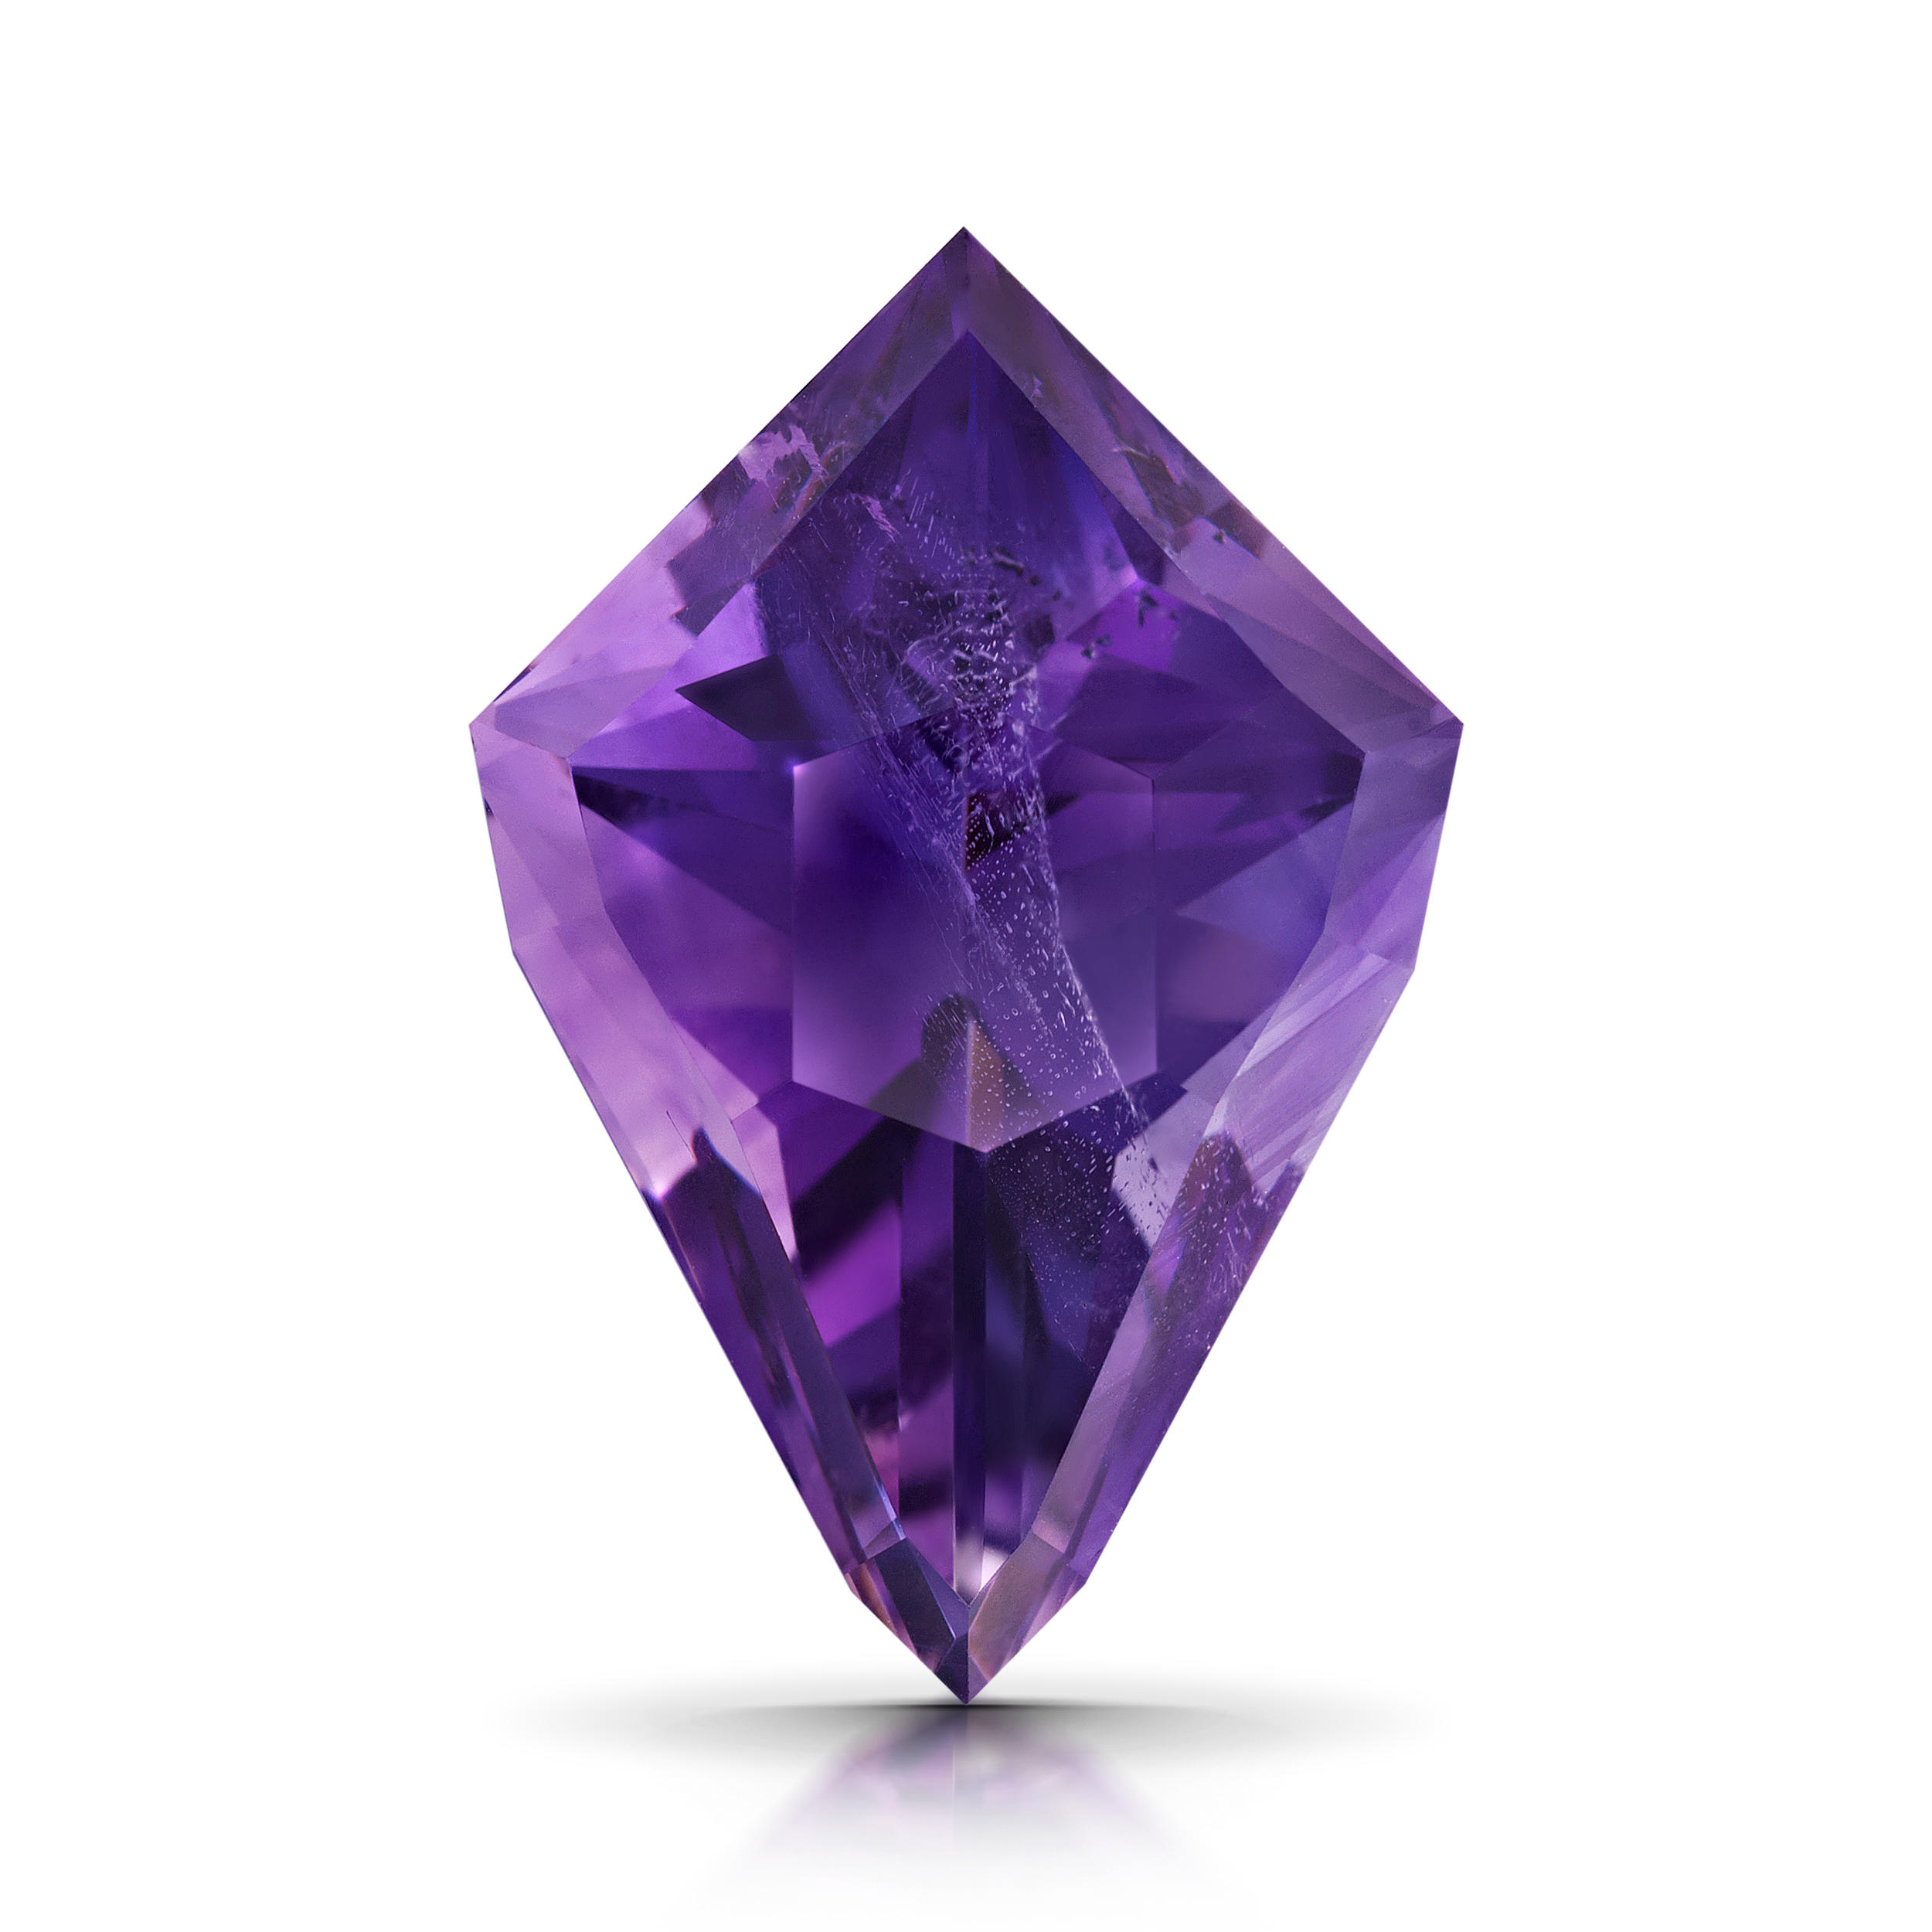 Ethically Sourced Amethyst Gemstones - Read More About Amethysts